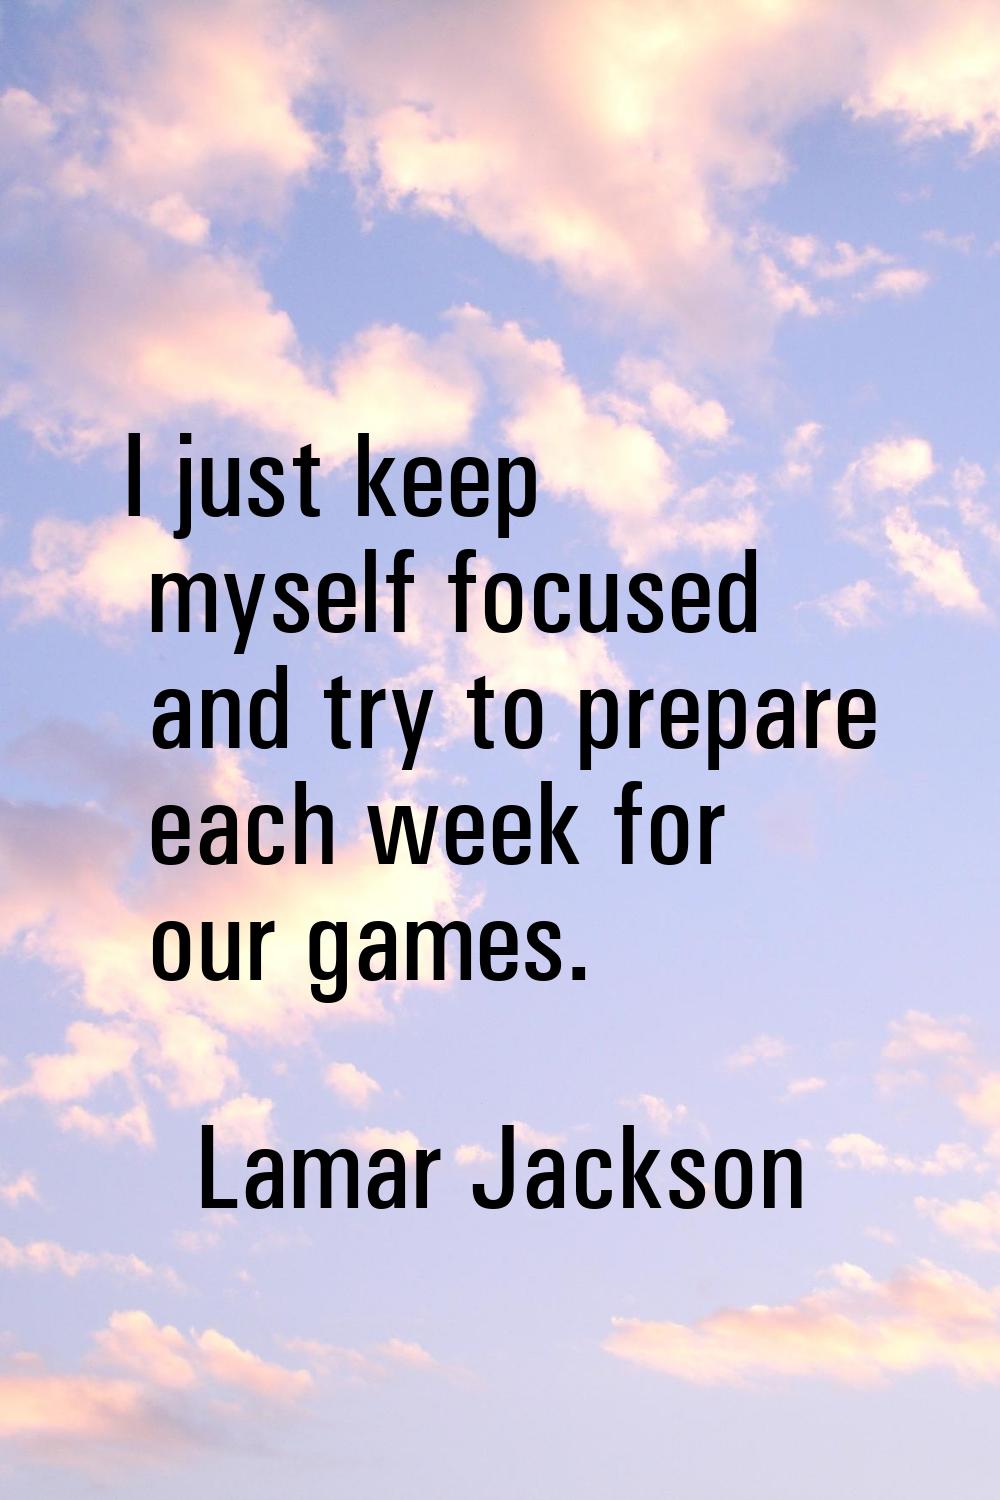 I just keep myself focused and try to prepare each week for our games.